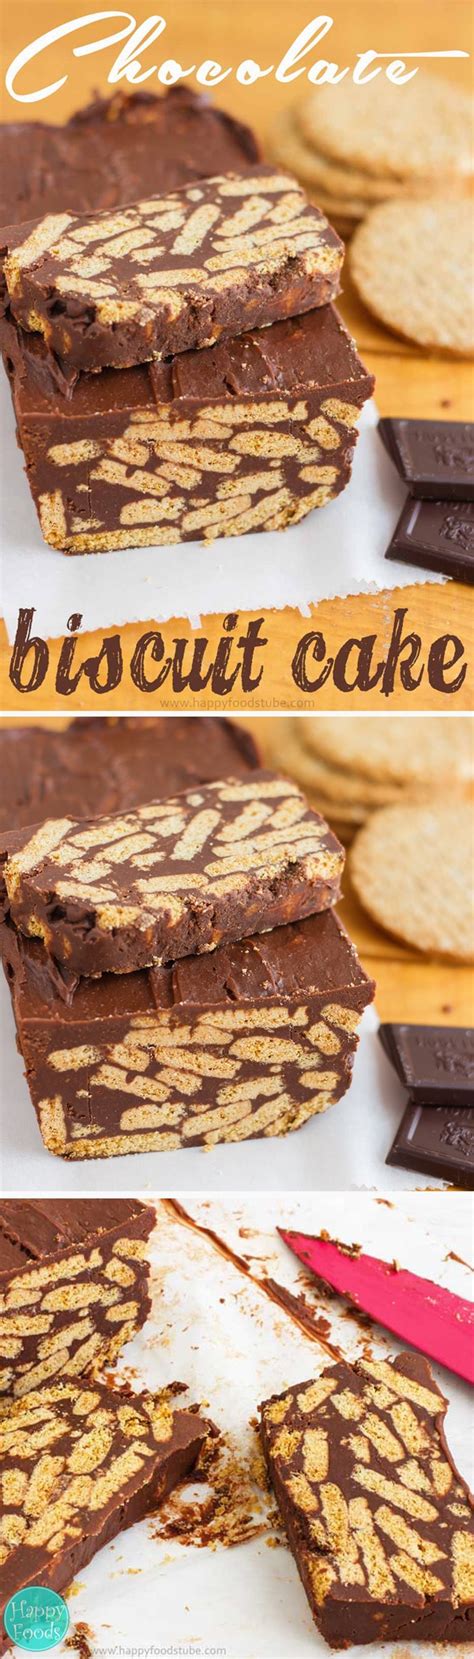 This biscuit cheesecake is great cake. No Bake Chocolate Biscuit Cake Recipe - Happy Foods Tube | Recipe | Chocolate biscuit cake ...